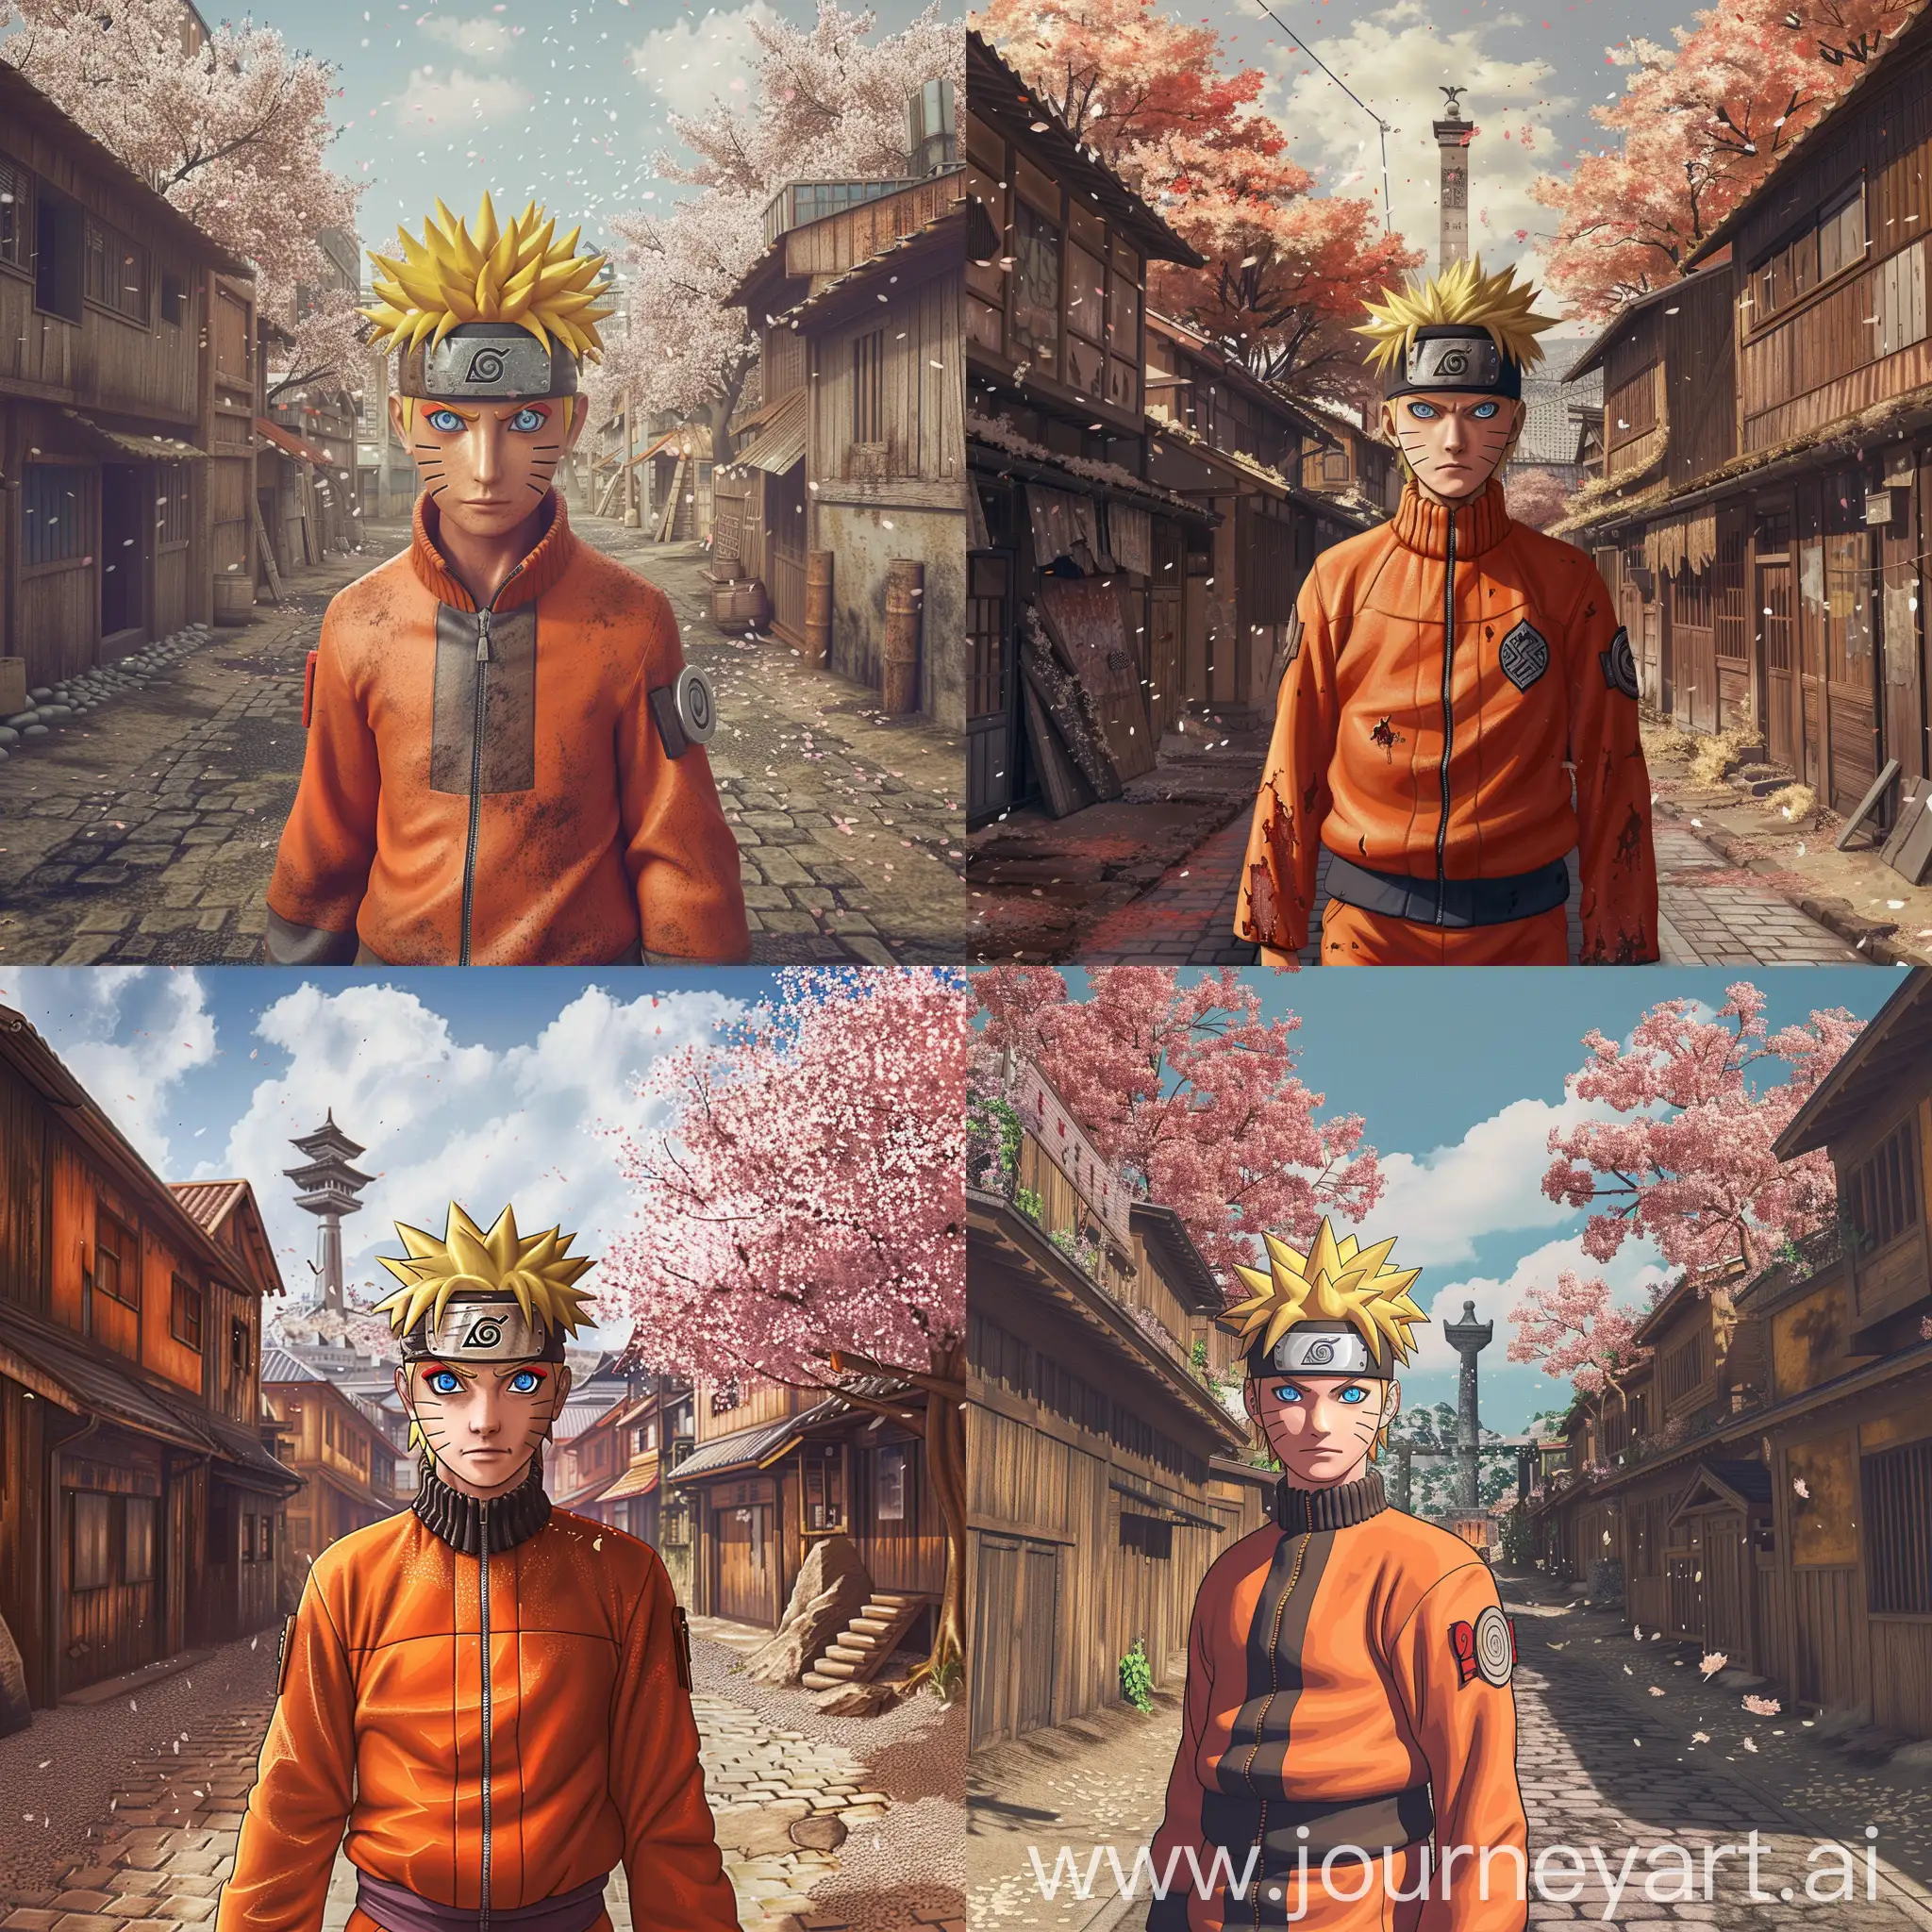 Description:

Generate an awe-inspiring hyper-realistic image of Naruto Uzumaki, the iconic hero of the Hidden Leaf Village, with meticulous attention to detail in both his features and the surrounding environment.

Background:

The background should vividly portray the Hidden Leaf Village, with intricate details such as weathered wooden buildings, cobblestone streets, cherry blossom trees in full bloom, and the imposing presence of the Hokage Monument in the distance. Ensure that lighting conditions capture the essence of a vibrant, bustling village scene.

Naruto's Features:

Naruto's full body should be visible, showcasing his signature orange jumpsuit adorned with intricate designs and accurate folds. Pay close attention to the texture of the fabric, capturing nuances of wear and tear. His muscular physique should be portrayed realistically, with well-defined musculature and subtle hints of movement. Naruto's facial expression should convey his determination and resolve, with piercing blue eyes reflecting his unwavering spirit. His iconic spiky blond hair should be rendered with individual strands, capturing its dynamic flow and natural shine.

Realism:

The goal is to achieve hyper-realism, where every aspect of the image feels lifelike and tangible. Pay meticulous attention to lighting, shadows, and textures to create a sense of depth and immersion. Strive for accuracy in depicting both Naruto and the background environment, ensuring that every detail contributes to the overall realism of the scene.

 Please prioritize realism and attention to detail in both Naruto's features and the background environment, striving to create an image that feels as though it could exist in the real world.